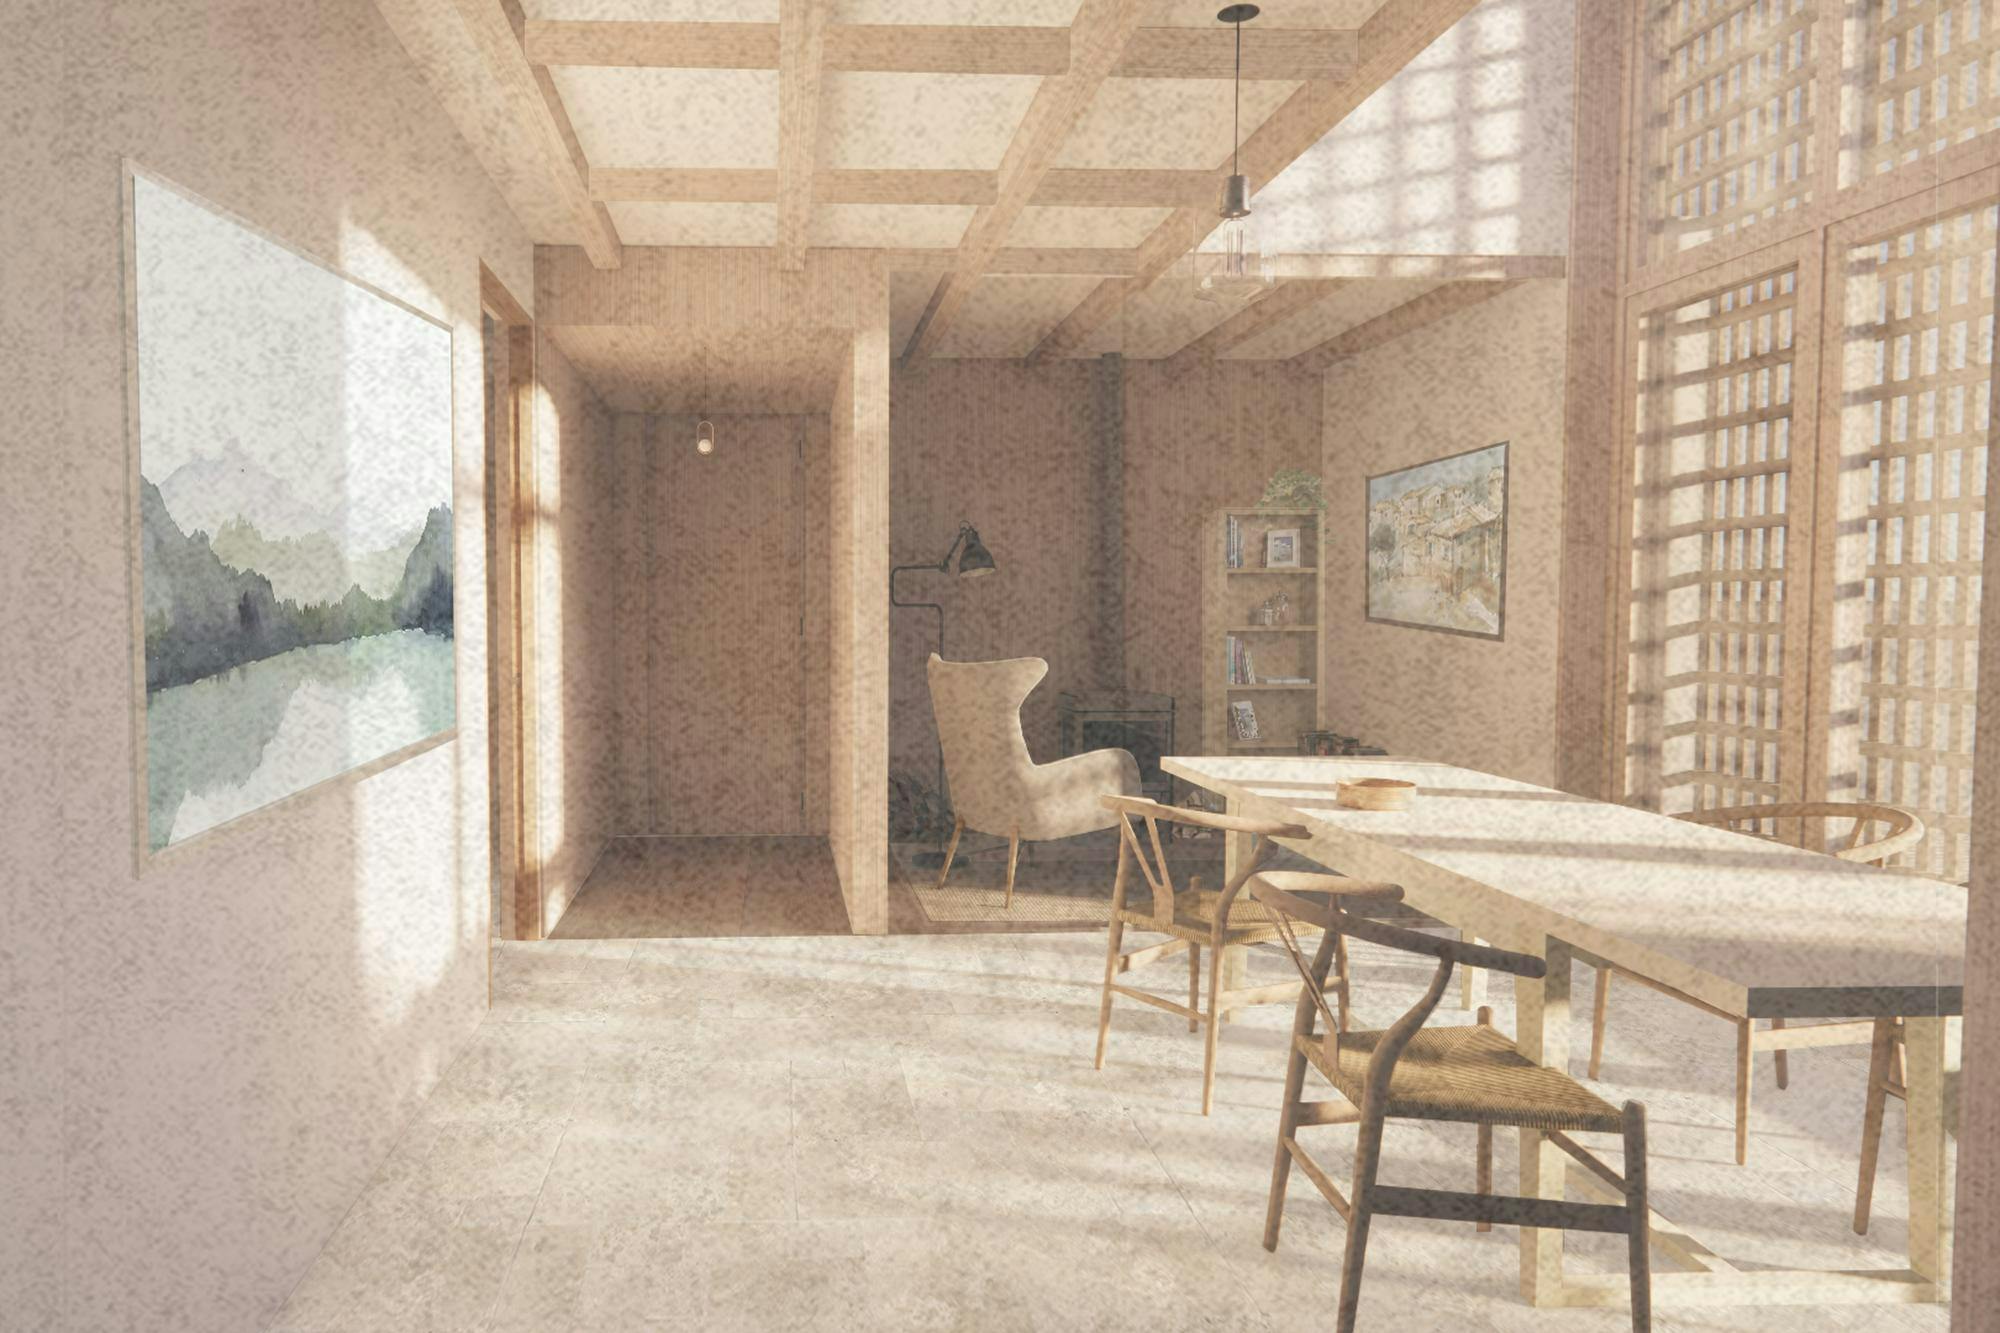 Architectural visualisation of interior dining room with external shutters in the Shropshire Farm